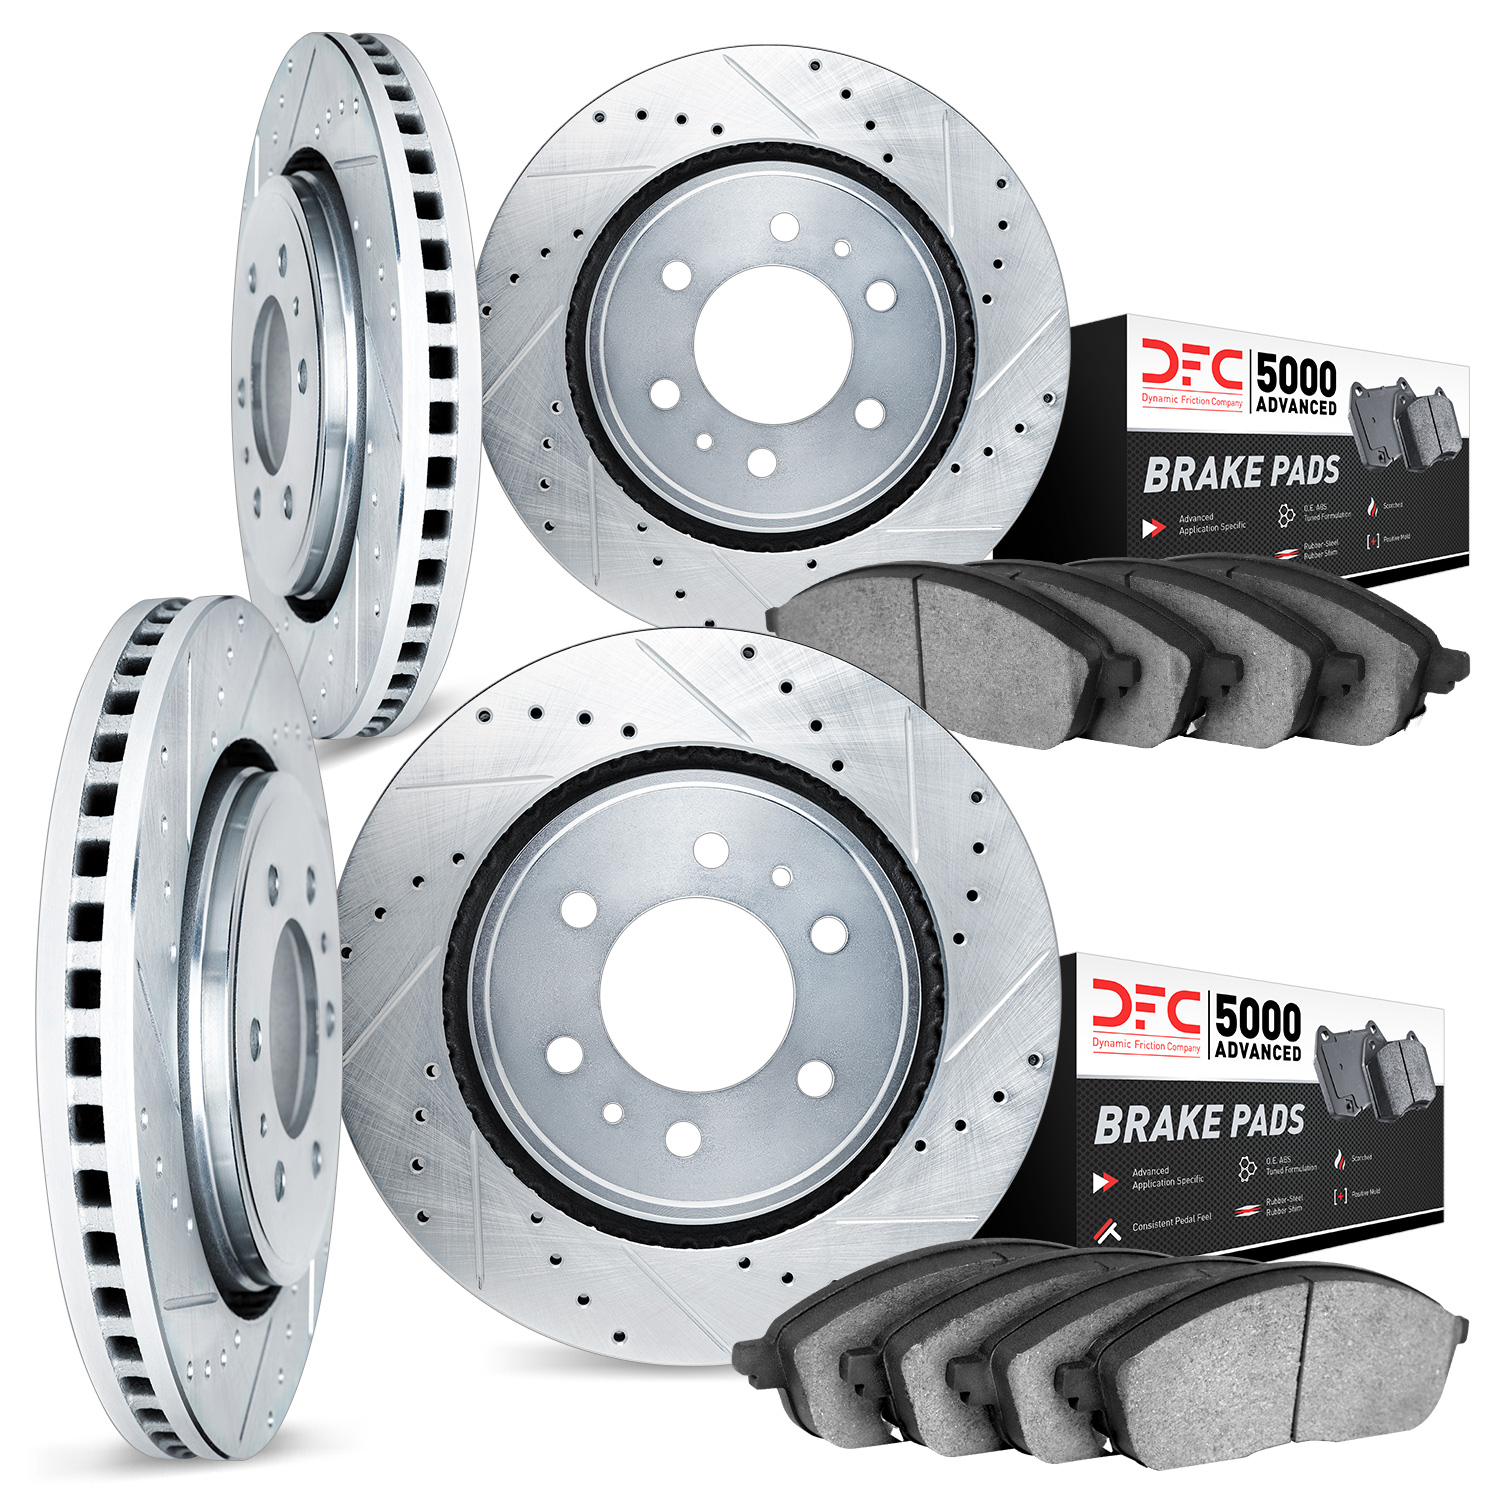 7504-54375 Drilled/Slotted Brake Rotors w/5000 Advanced Brake Pads Kit [Silver], 2007-2009 Ford/Lincoln/Mercury/Mazda, Position: